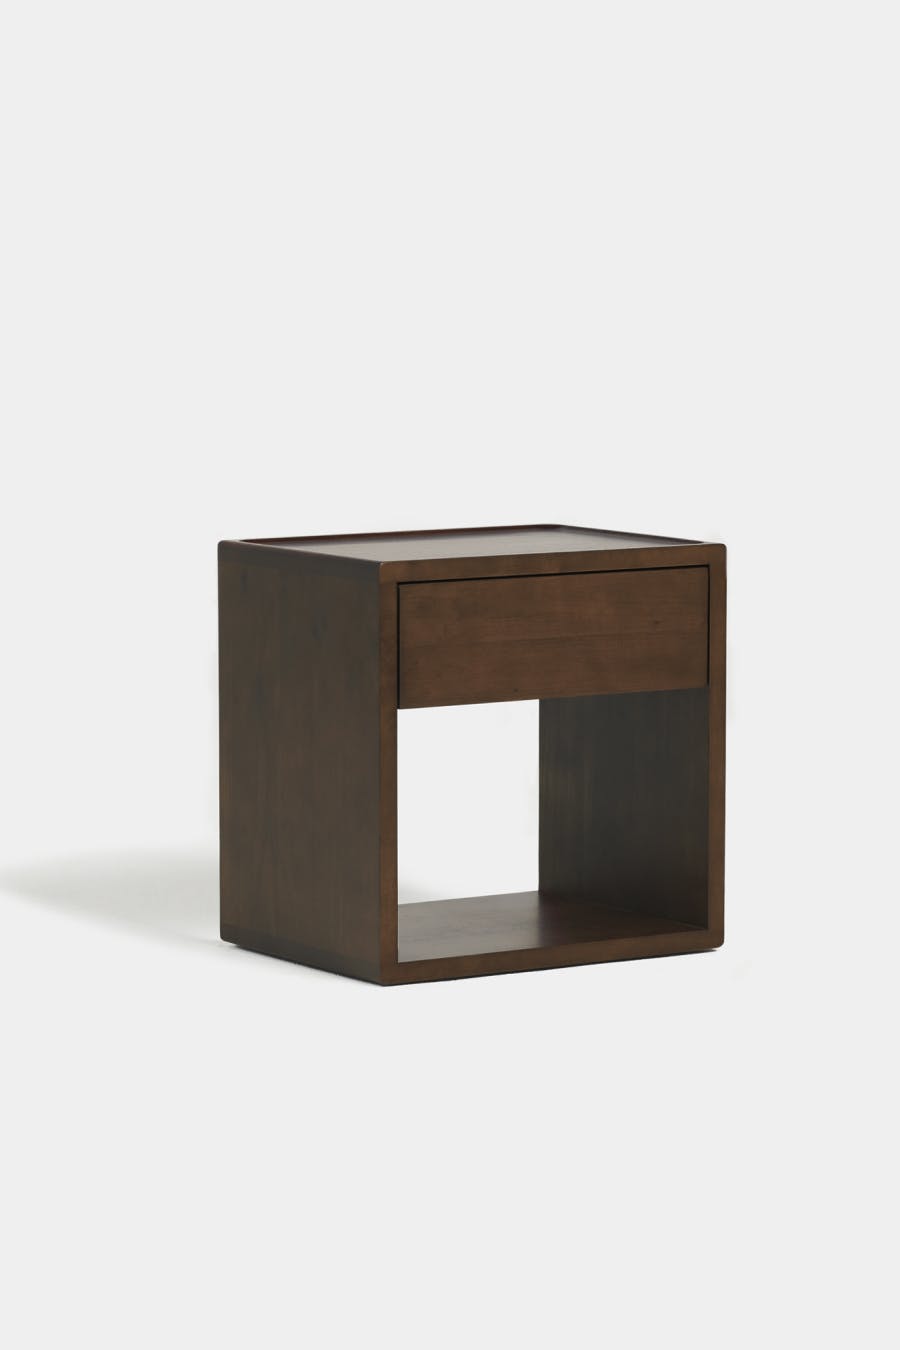 Shop by Category - Side Tables